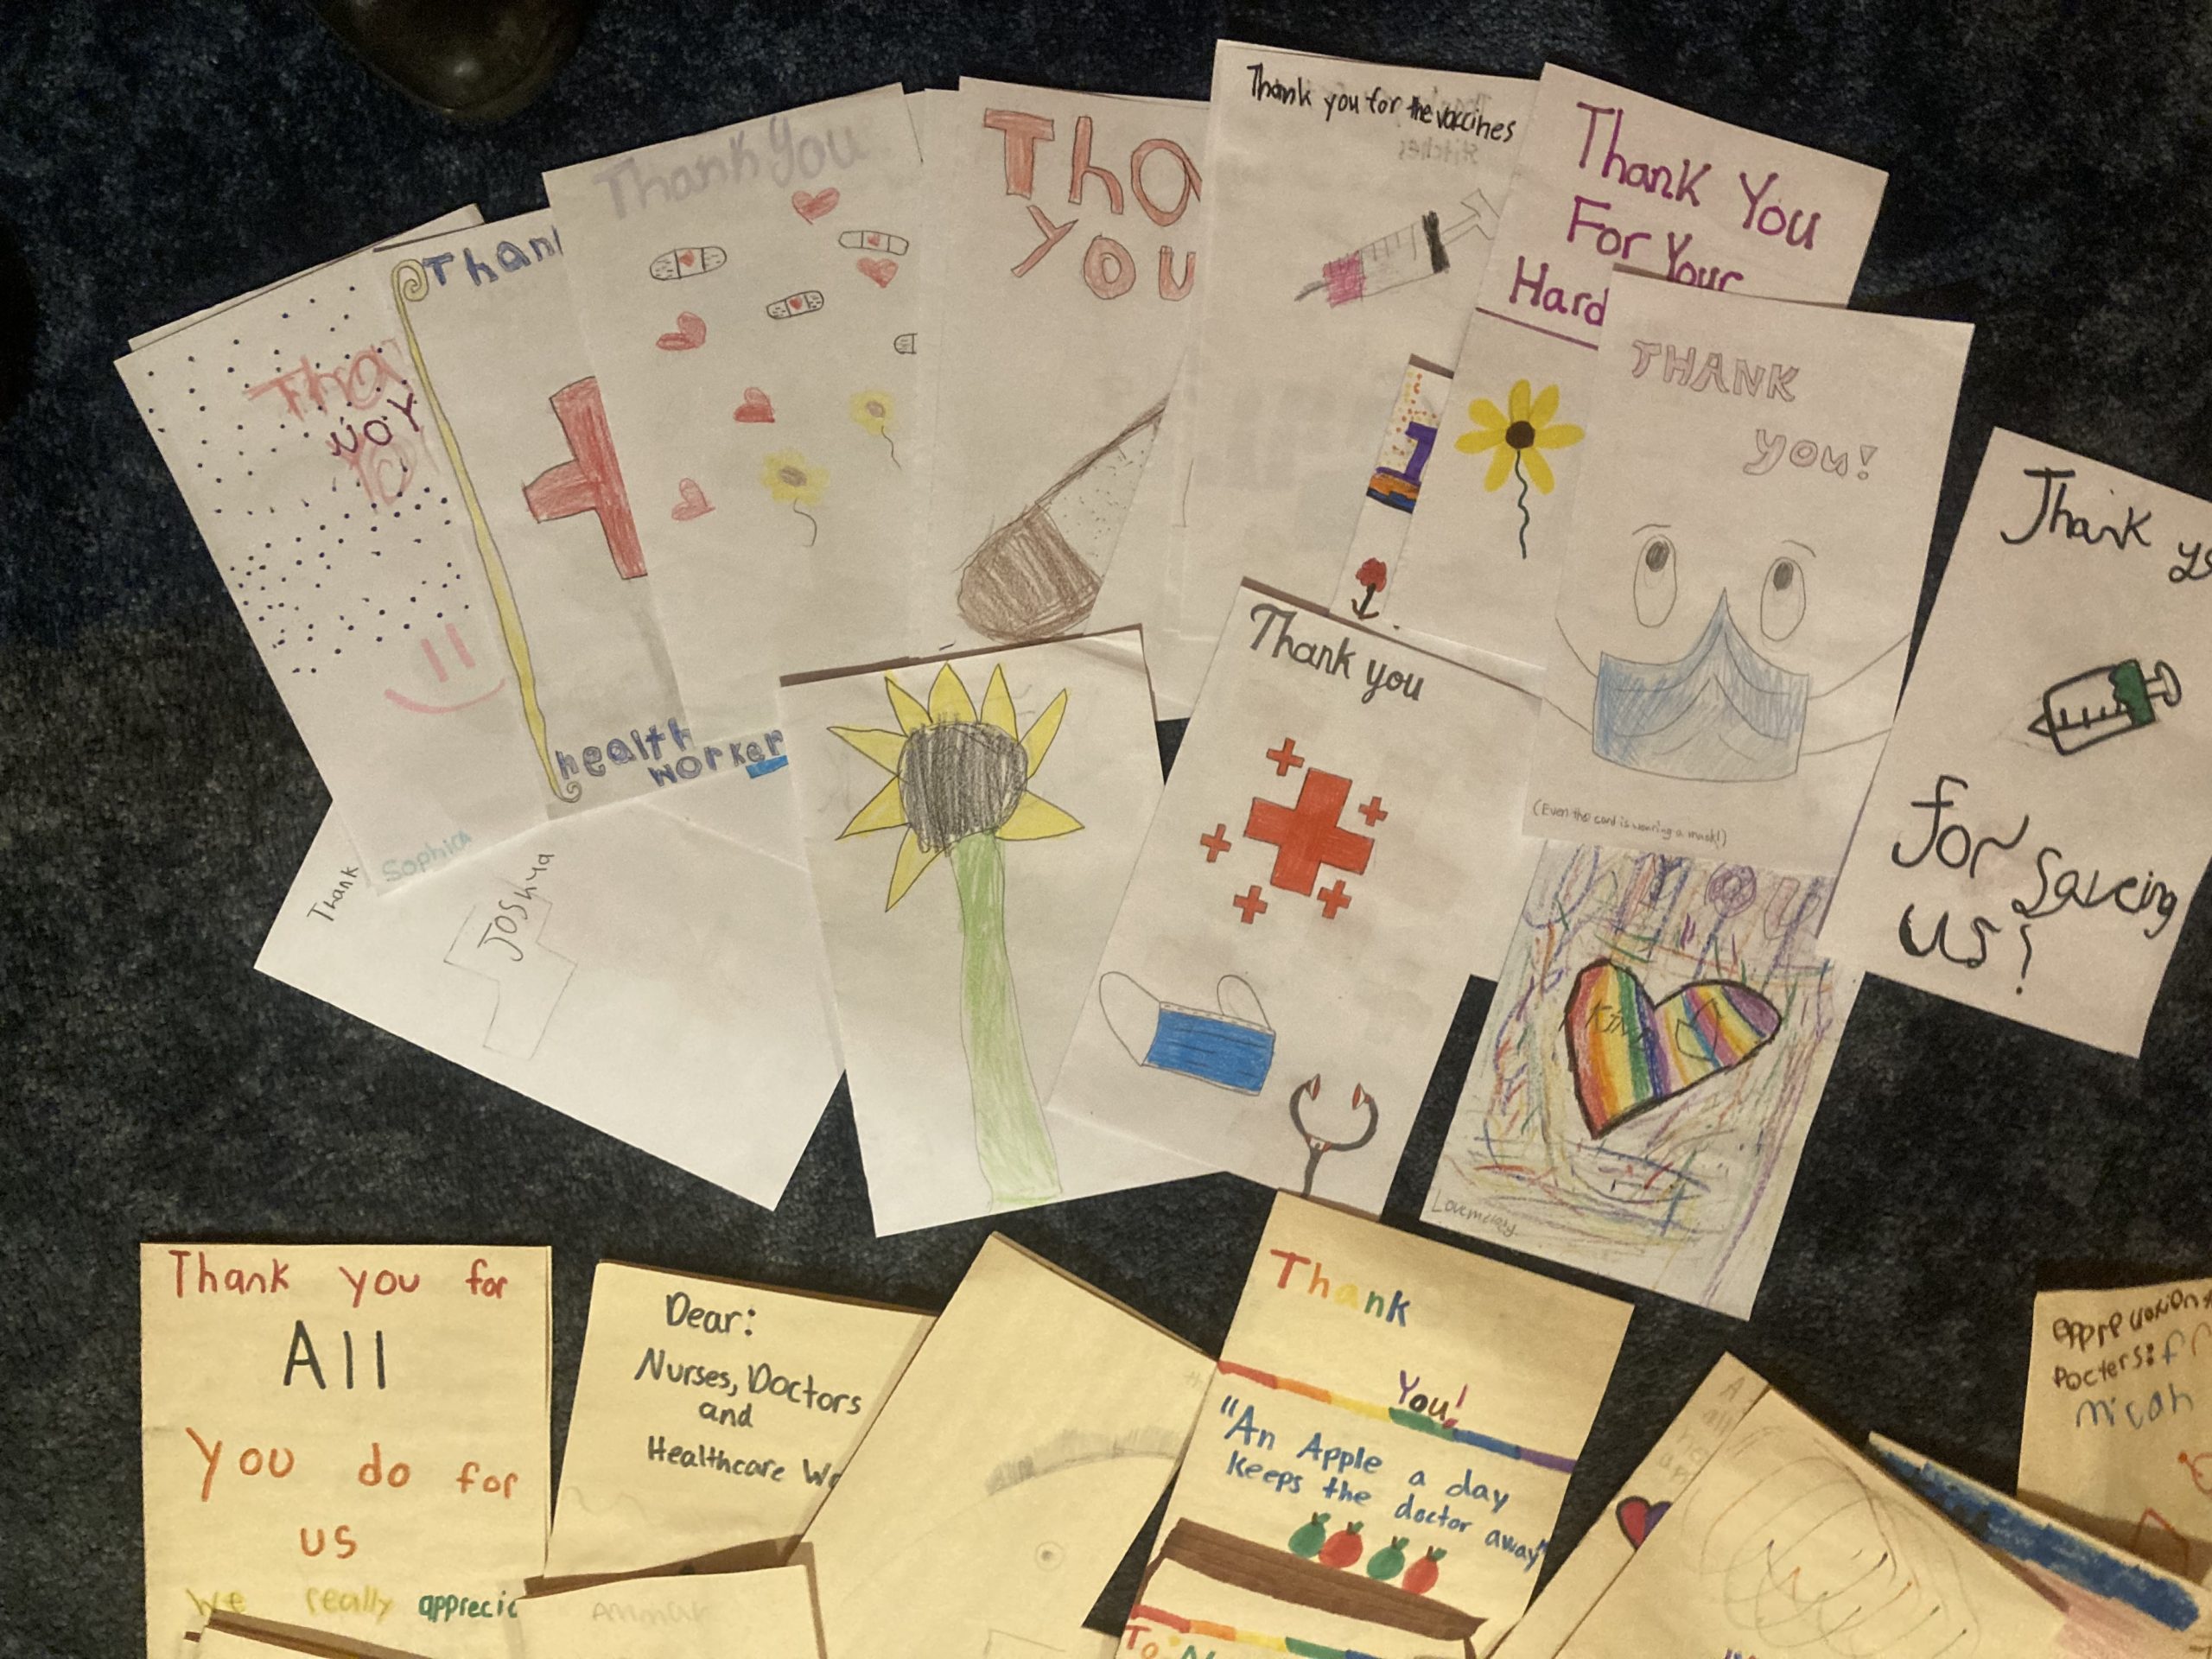 Cards of Appreciation & Love from Greenmont School